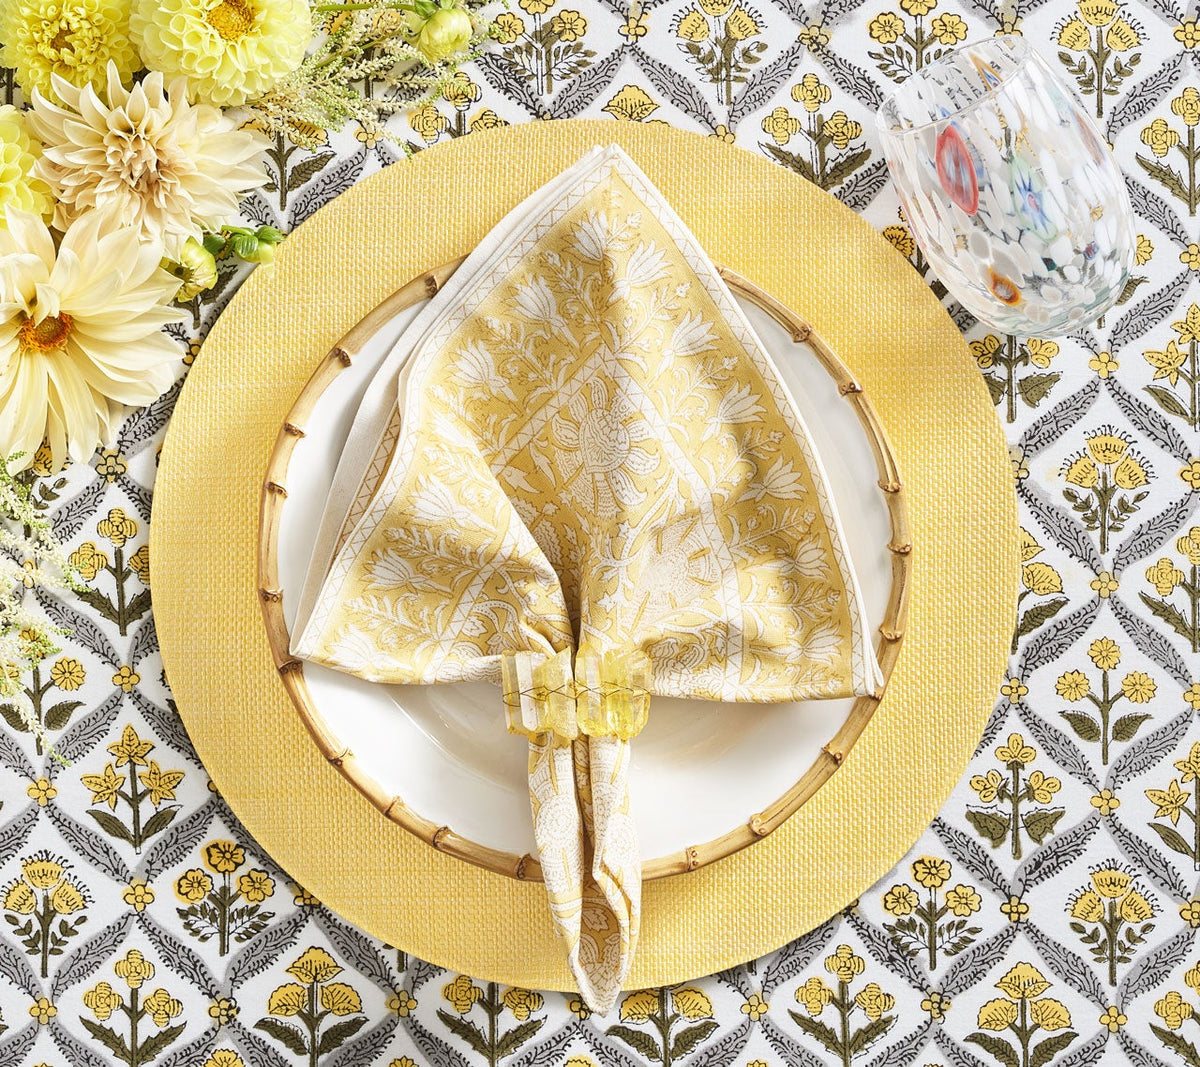 Kim Seybert Luxury Provence Napkin in yellow on a yellow place setting and patterned table cloth